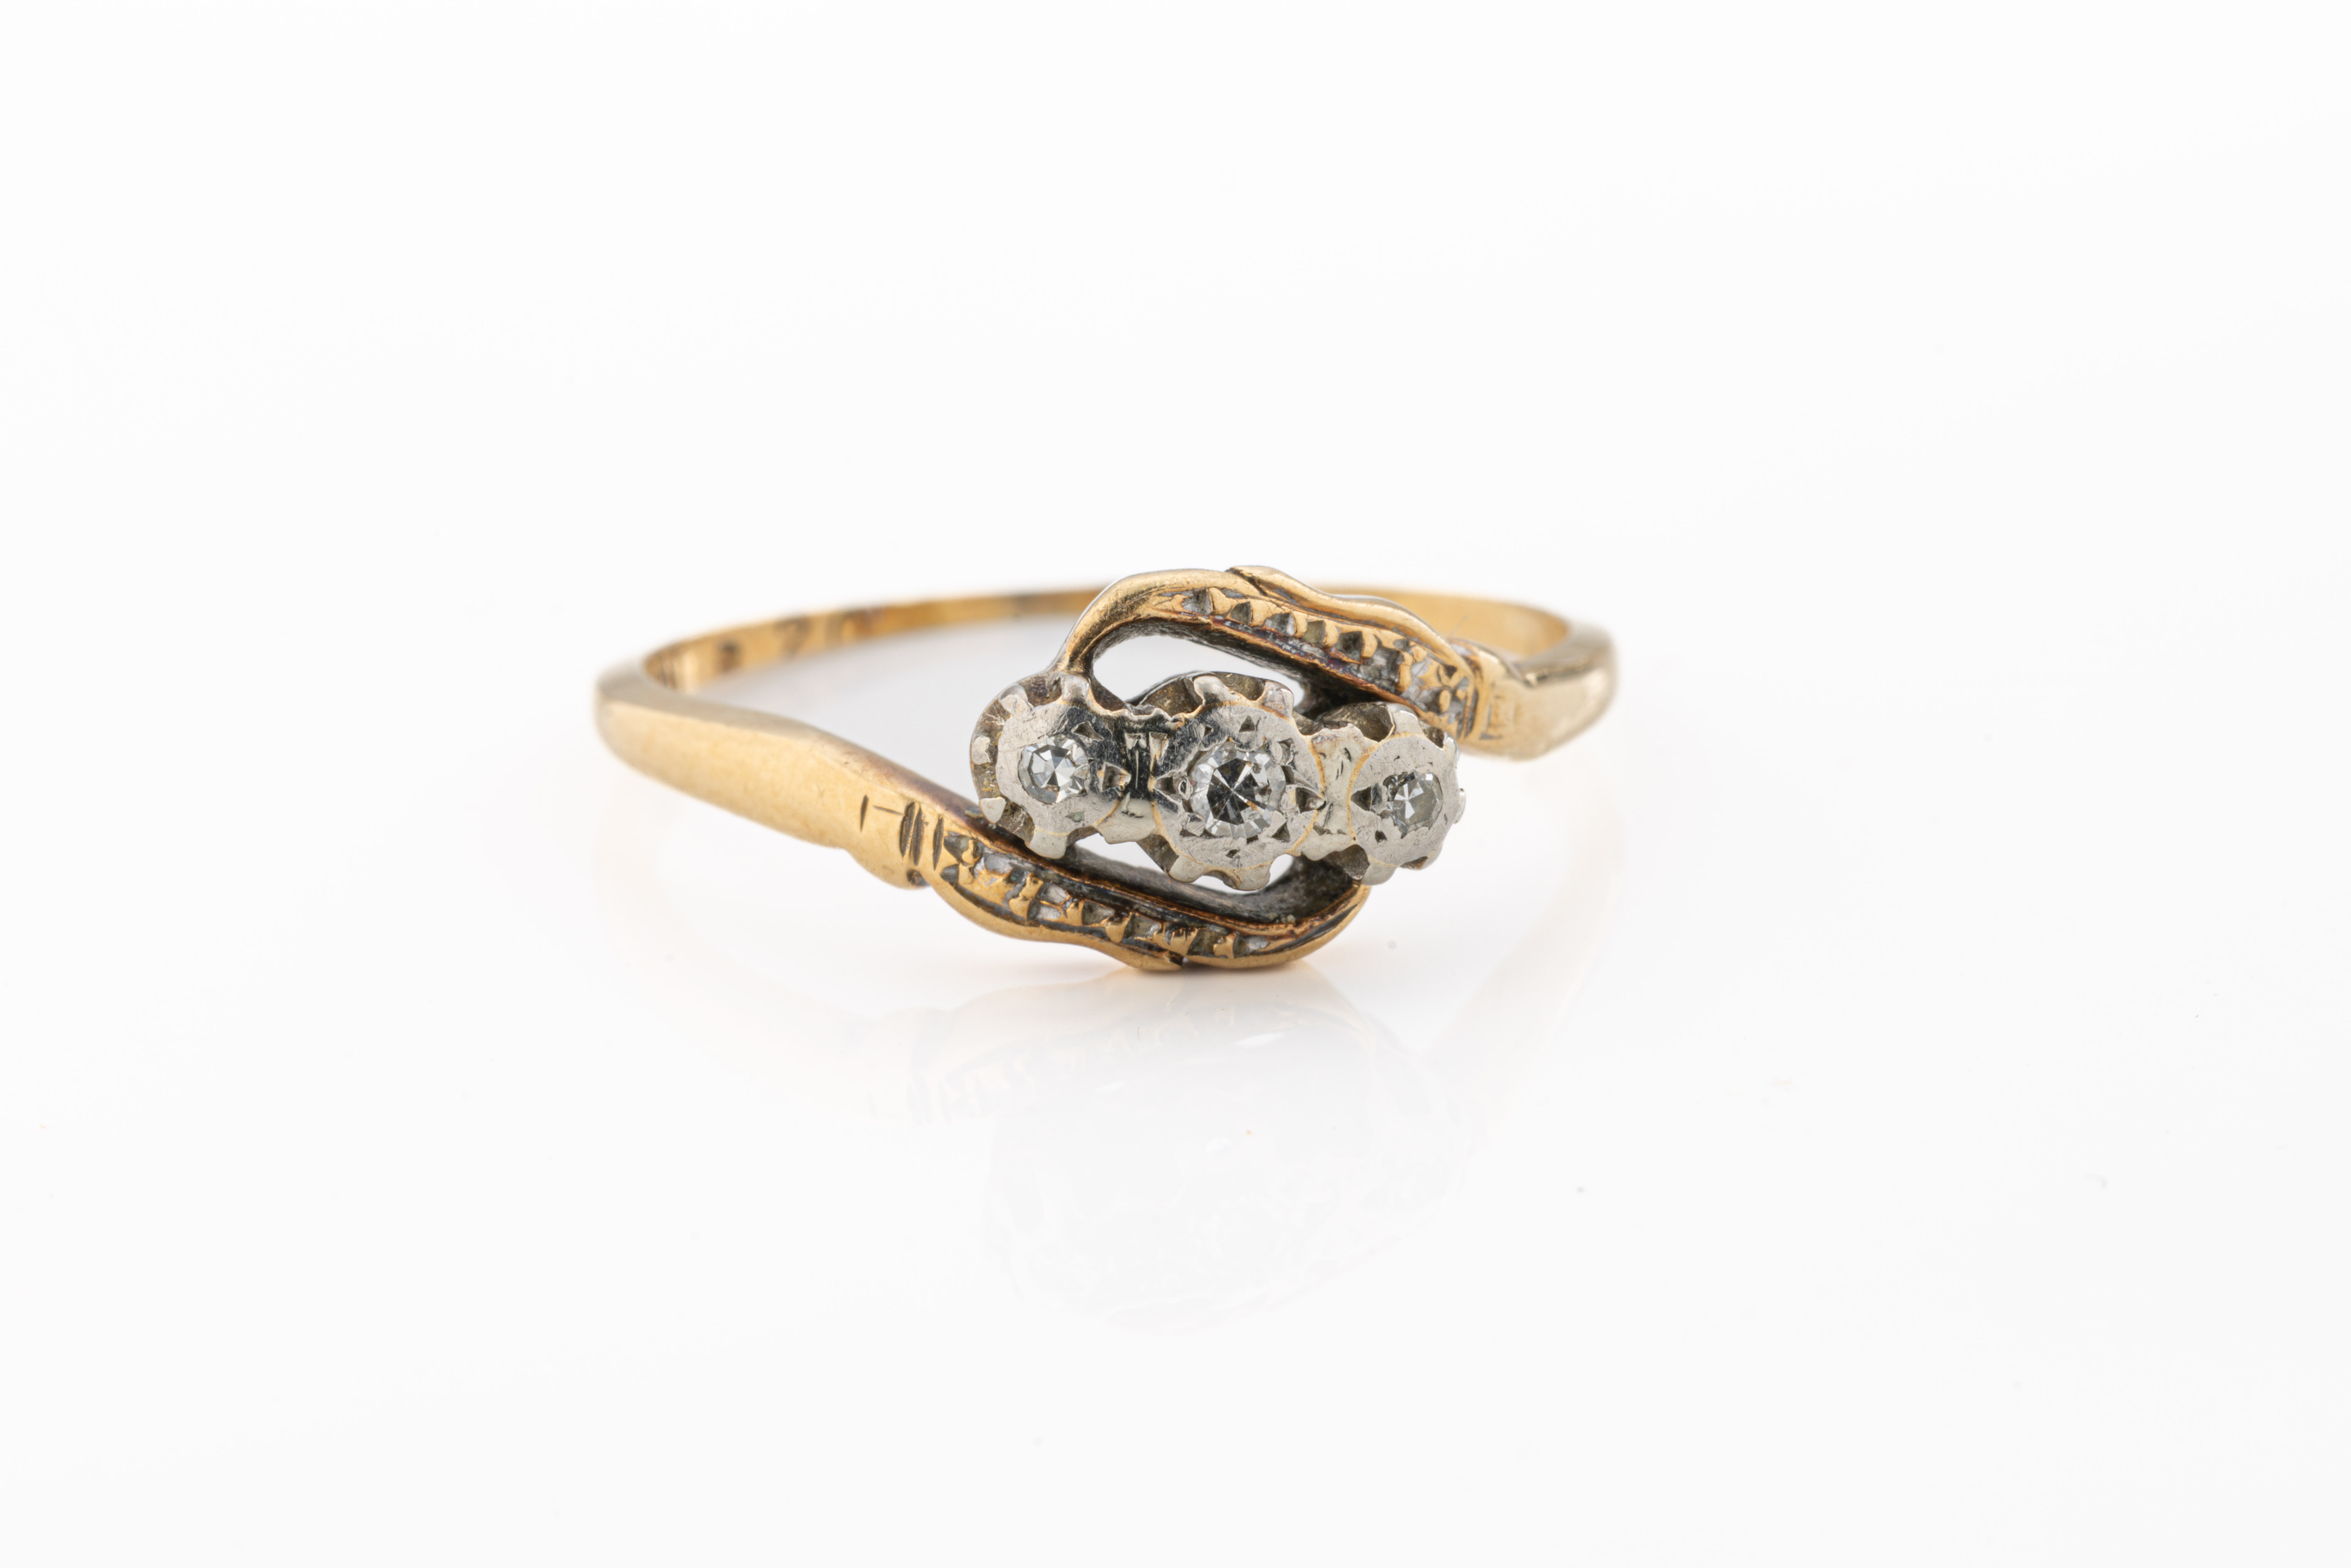 An 18ct yellow gold and platinum diamond ring